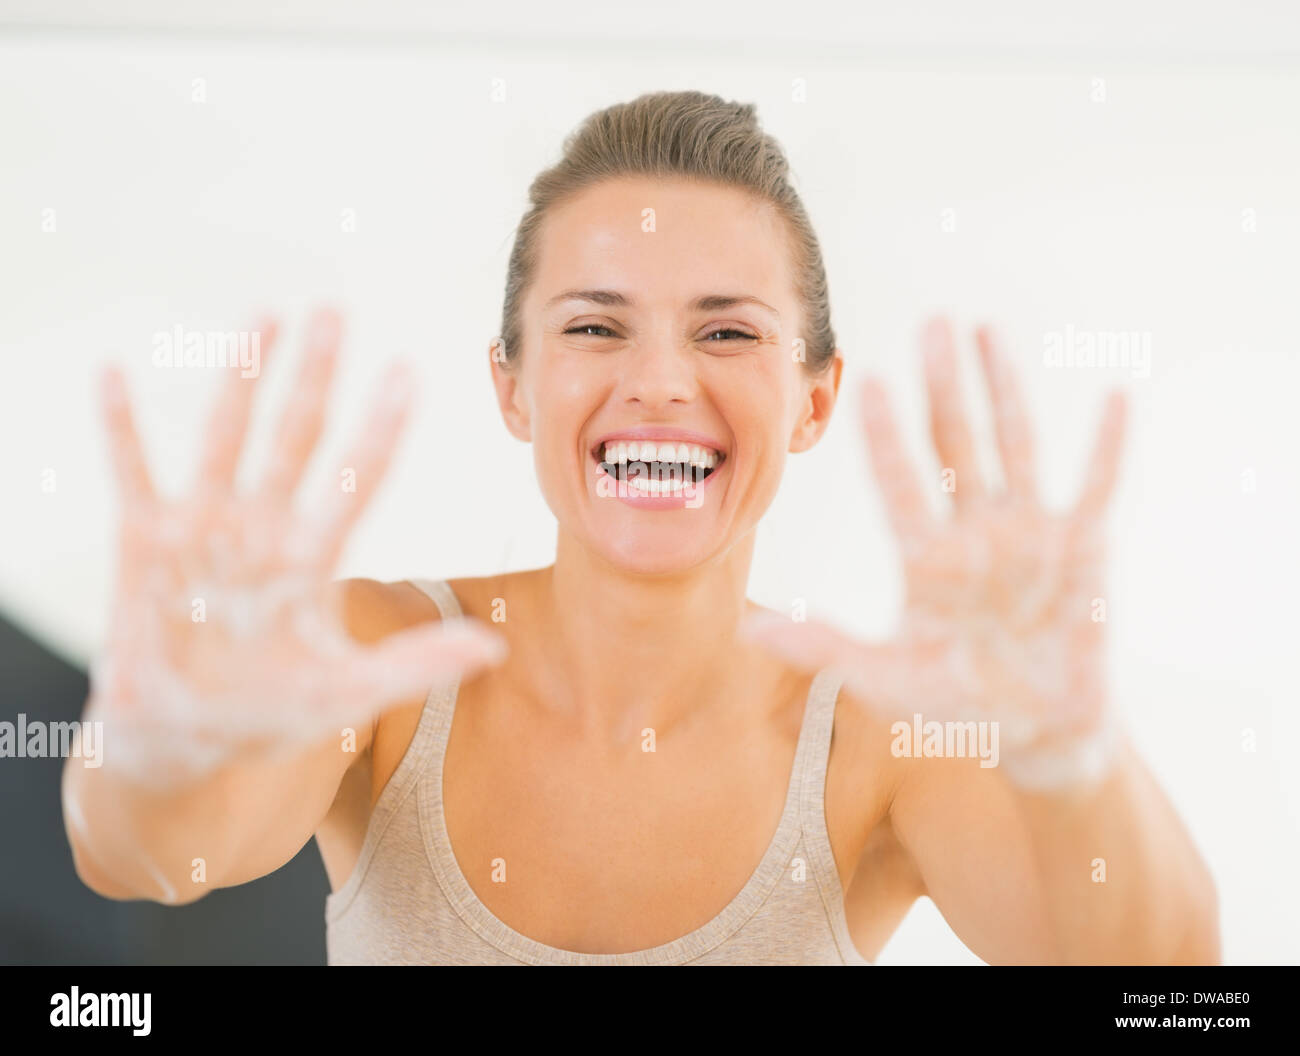 Portrait of smiling young woman showing hands with soap foam Stock Photo